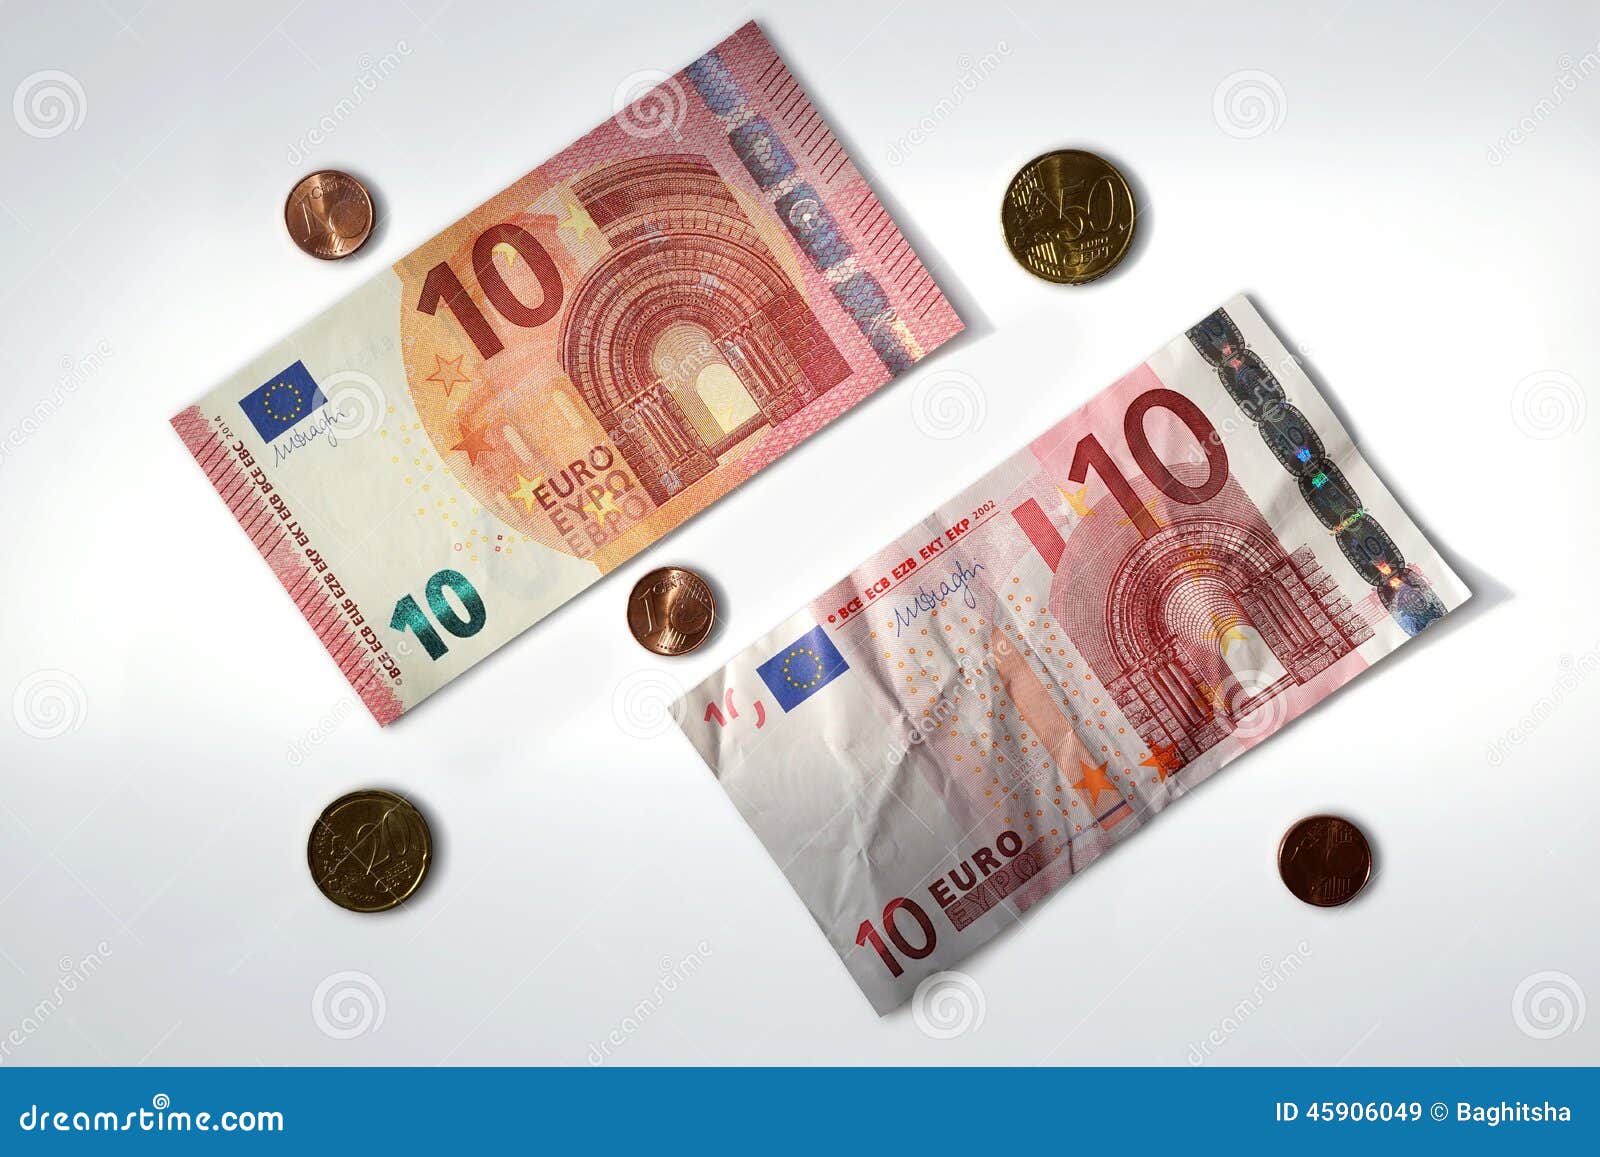 New and Old 10 Euro Banknotes Stock Image - Image of europe, horizontal:  45906049